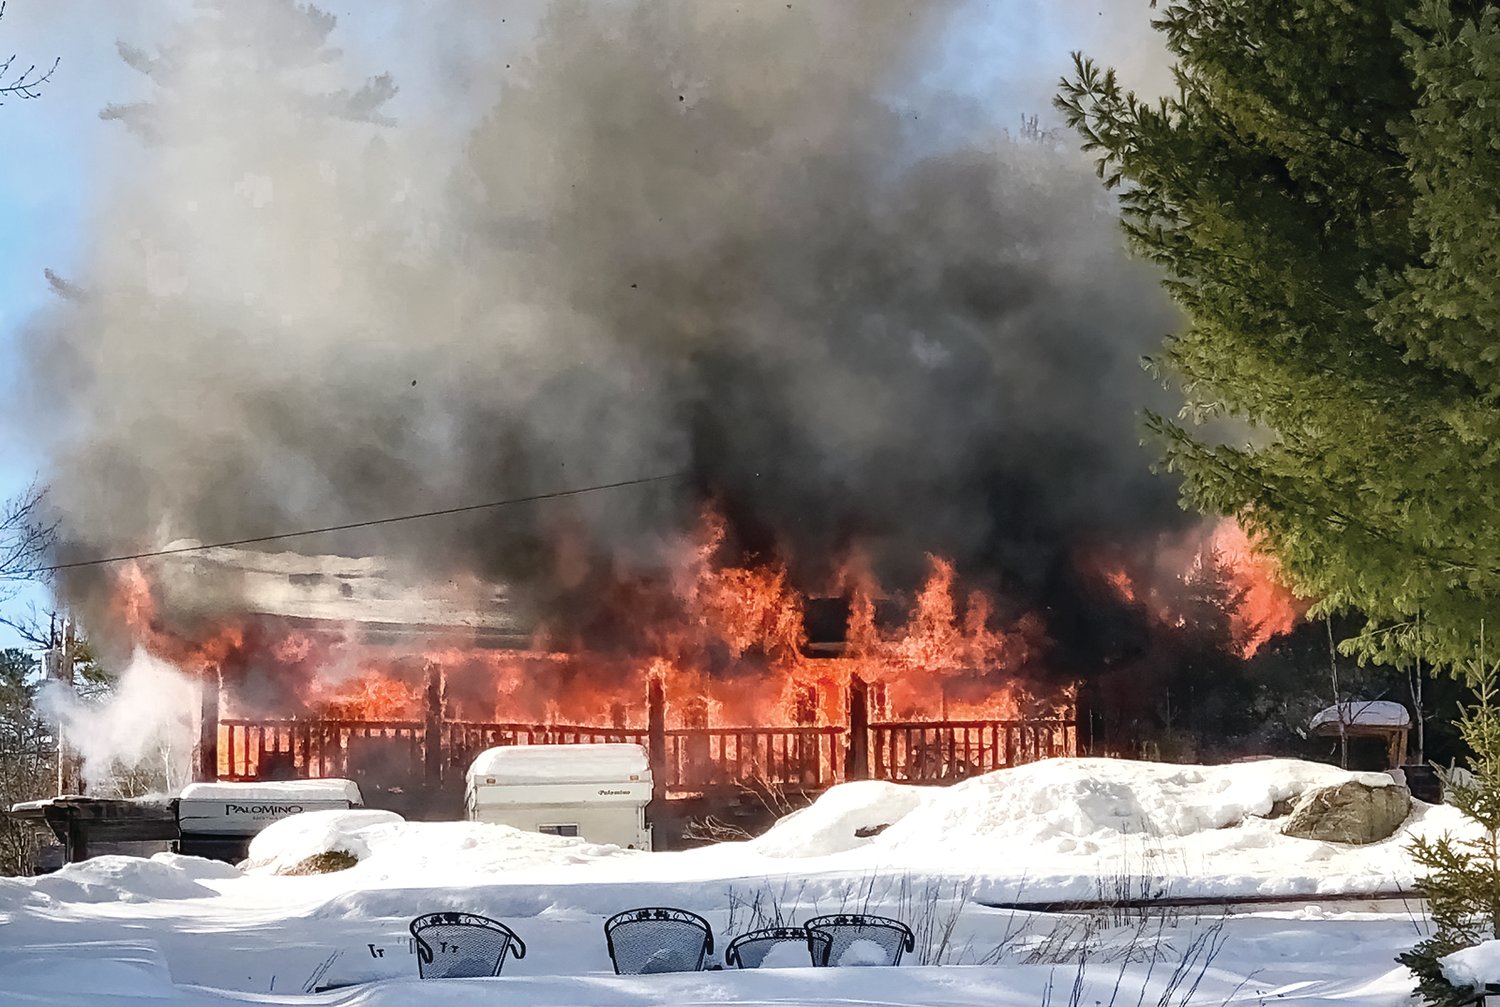 Four springer spaniels died in a Crane Lake house fire on Gold Coast Road on Sunday.